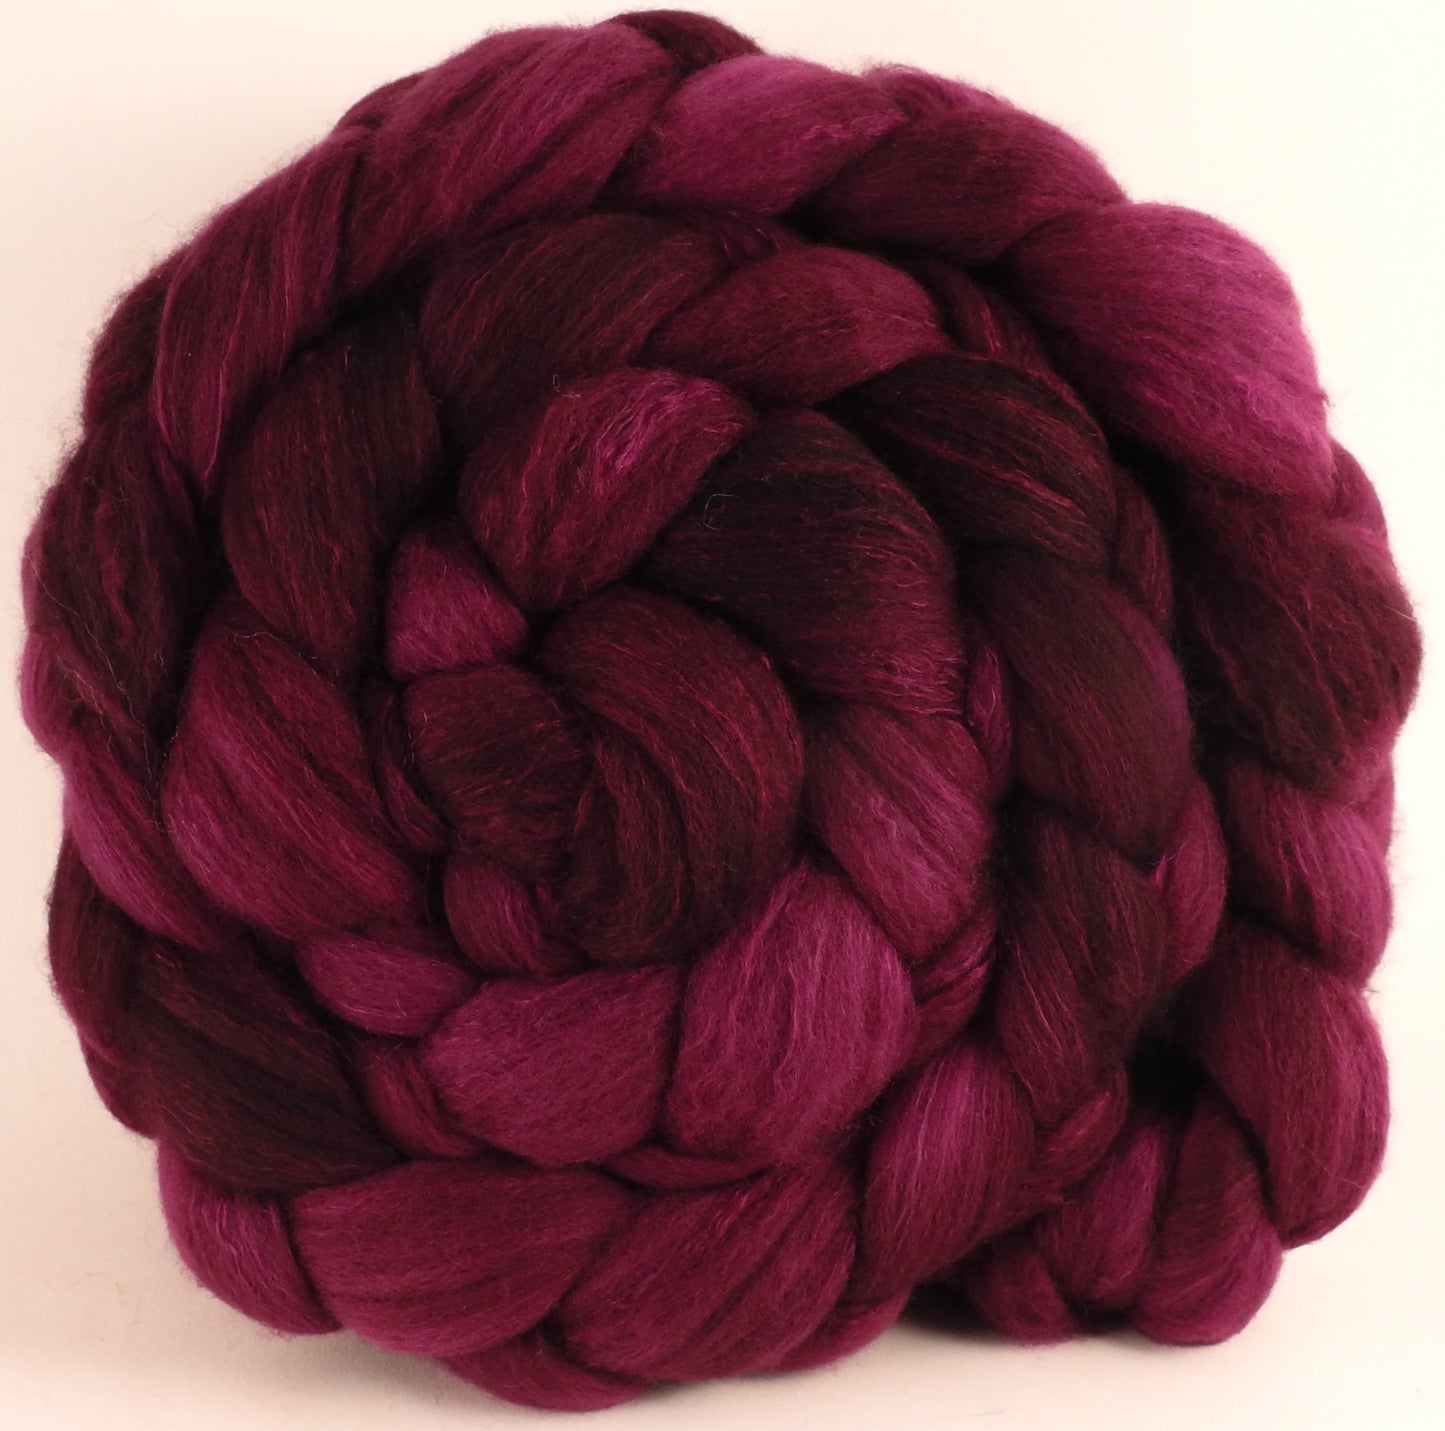 Hand dyed top for spinning - Mulberry - Organic Polwarth / Tussah silk (80/20) - Inglenook Fibers